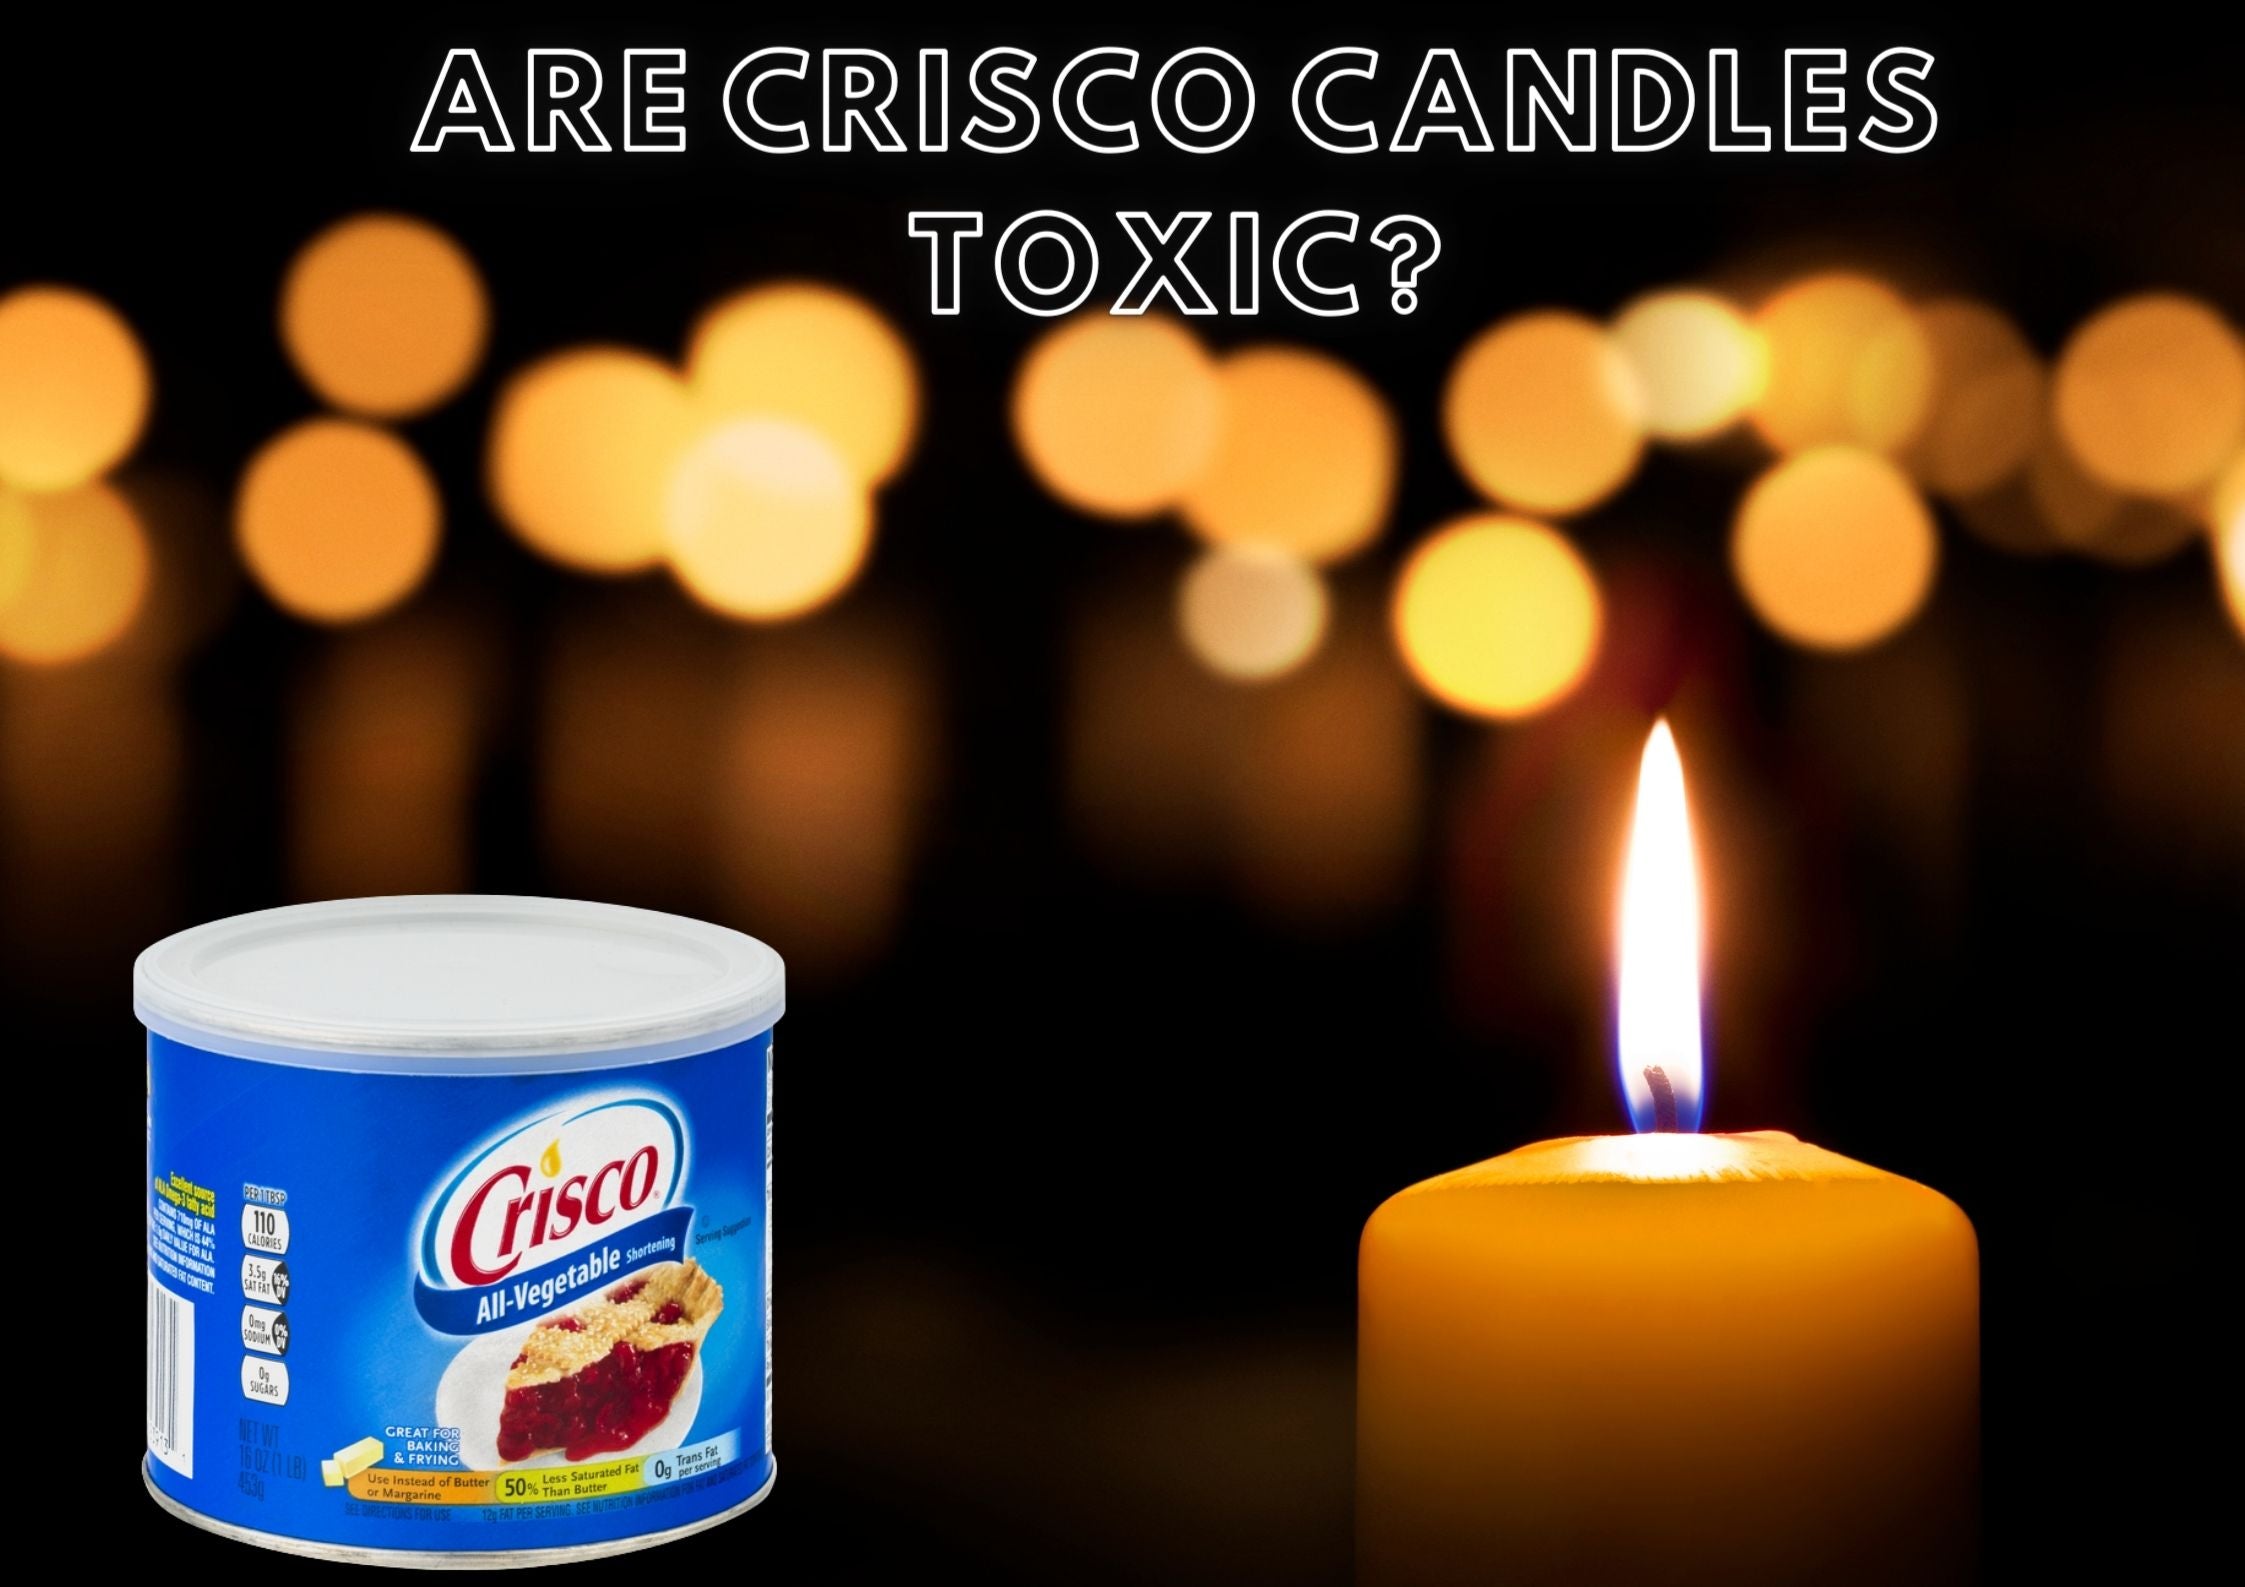 Are Crisco candles toxic?